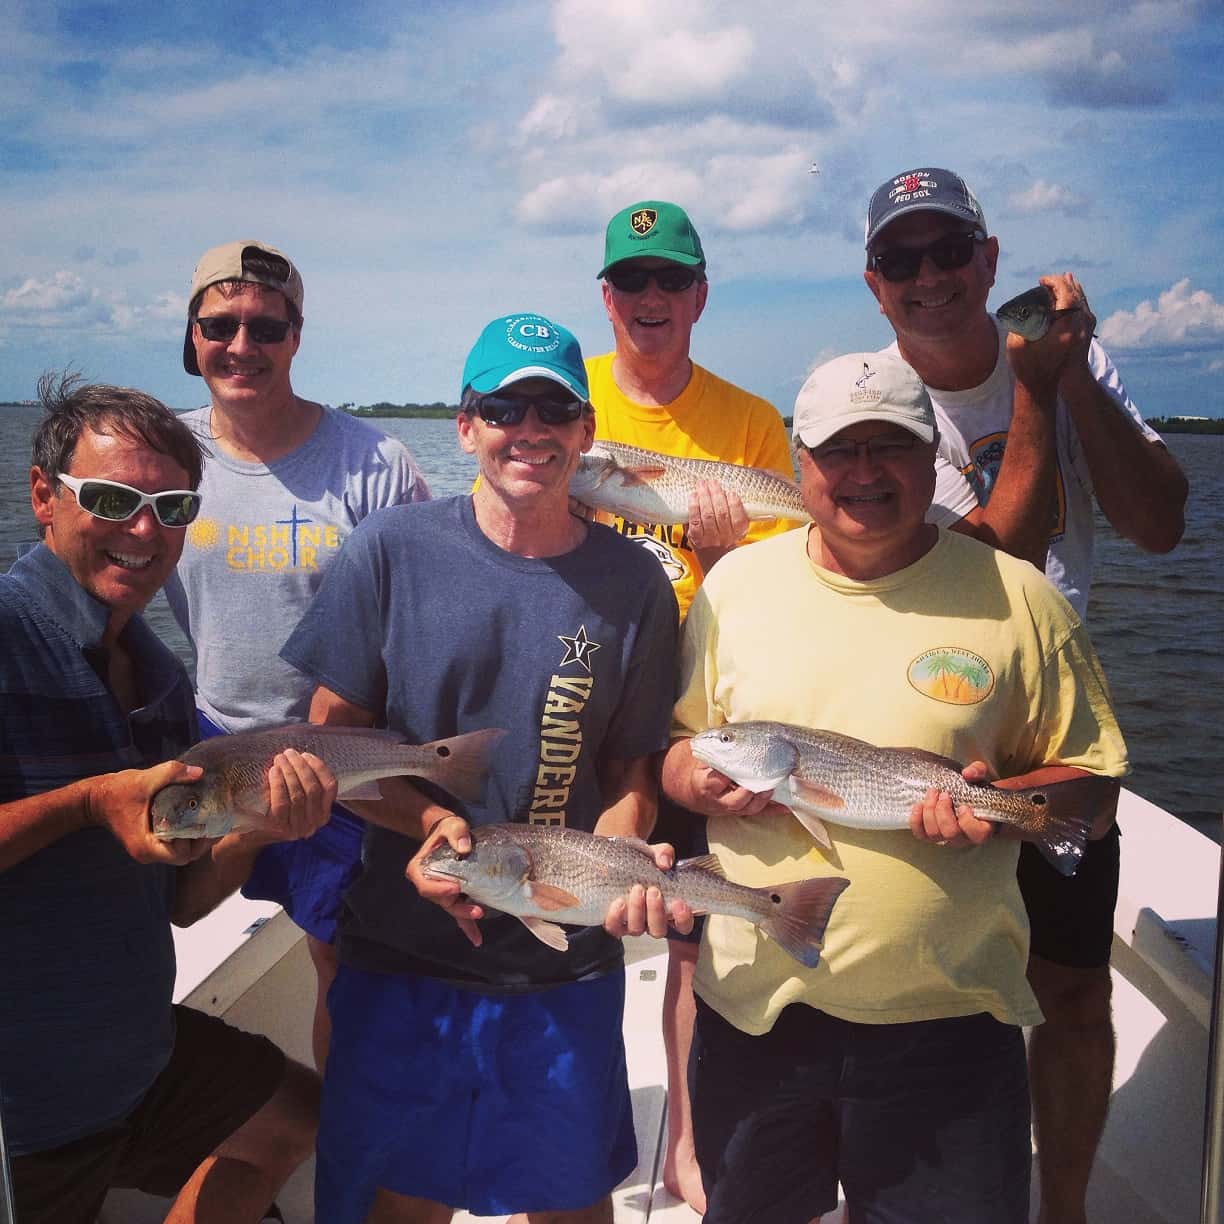 https://shallowpointcharters.com/wp-content/uploads/2014/10/The-Guys-got-the-fish-they-wanted-Good-job-in-Tampa-Bay.jpg